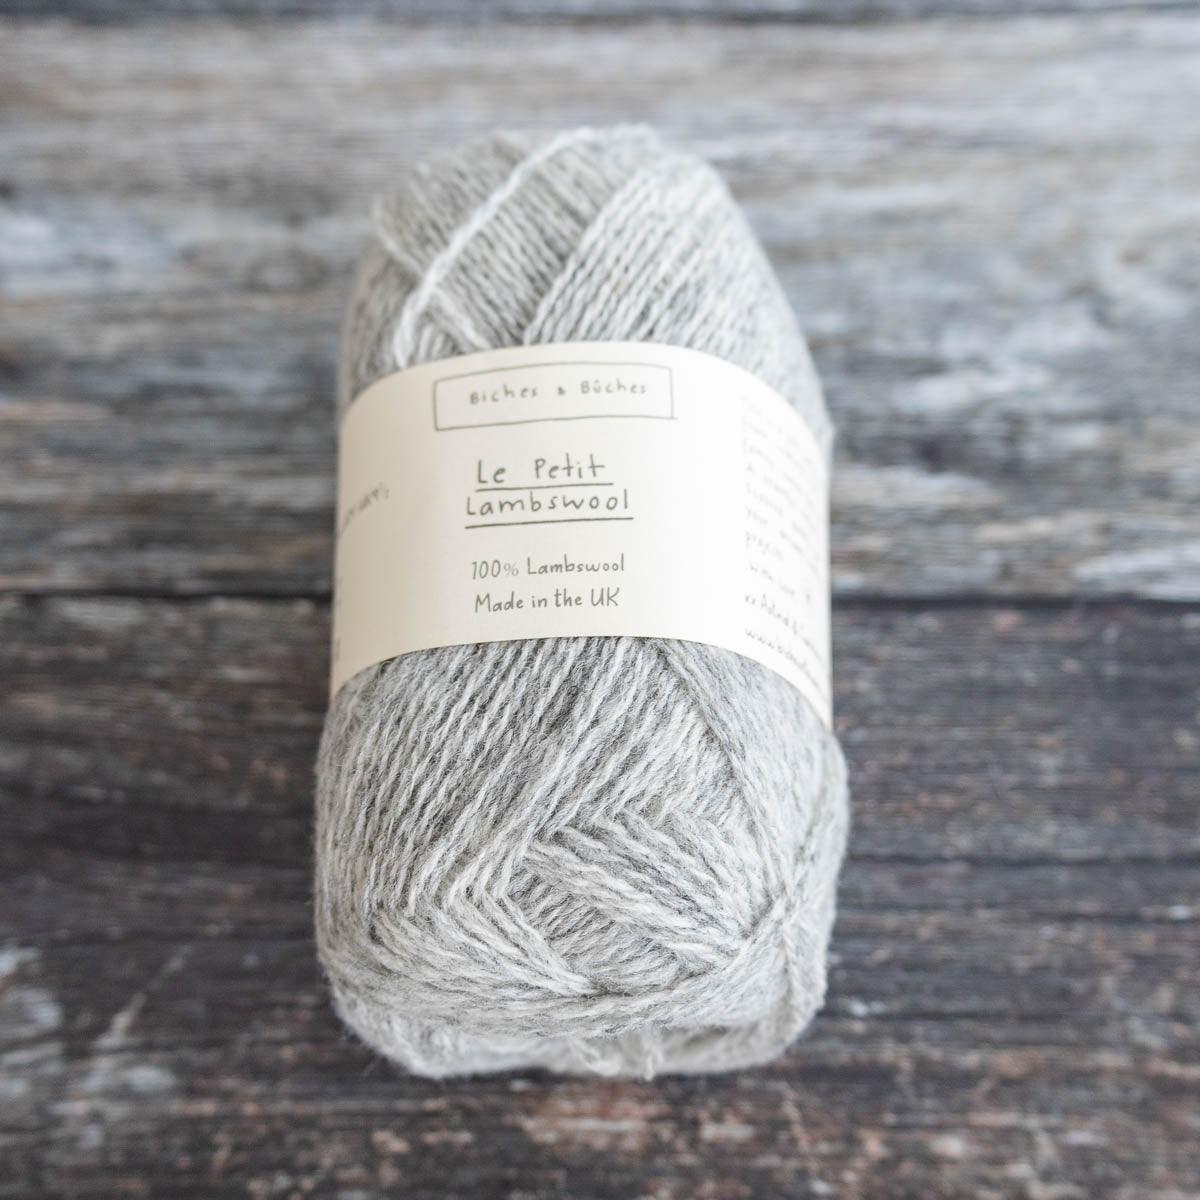 Biches & Bûches Biches & Bûches Le Petit Lambswool - Light Grey - 4ply Knitting Yarn